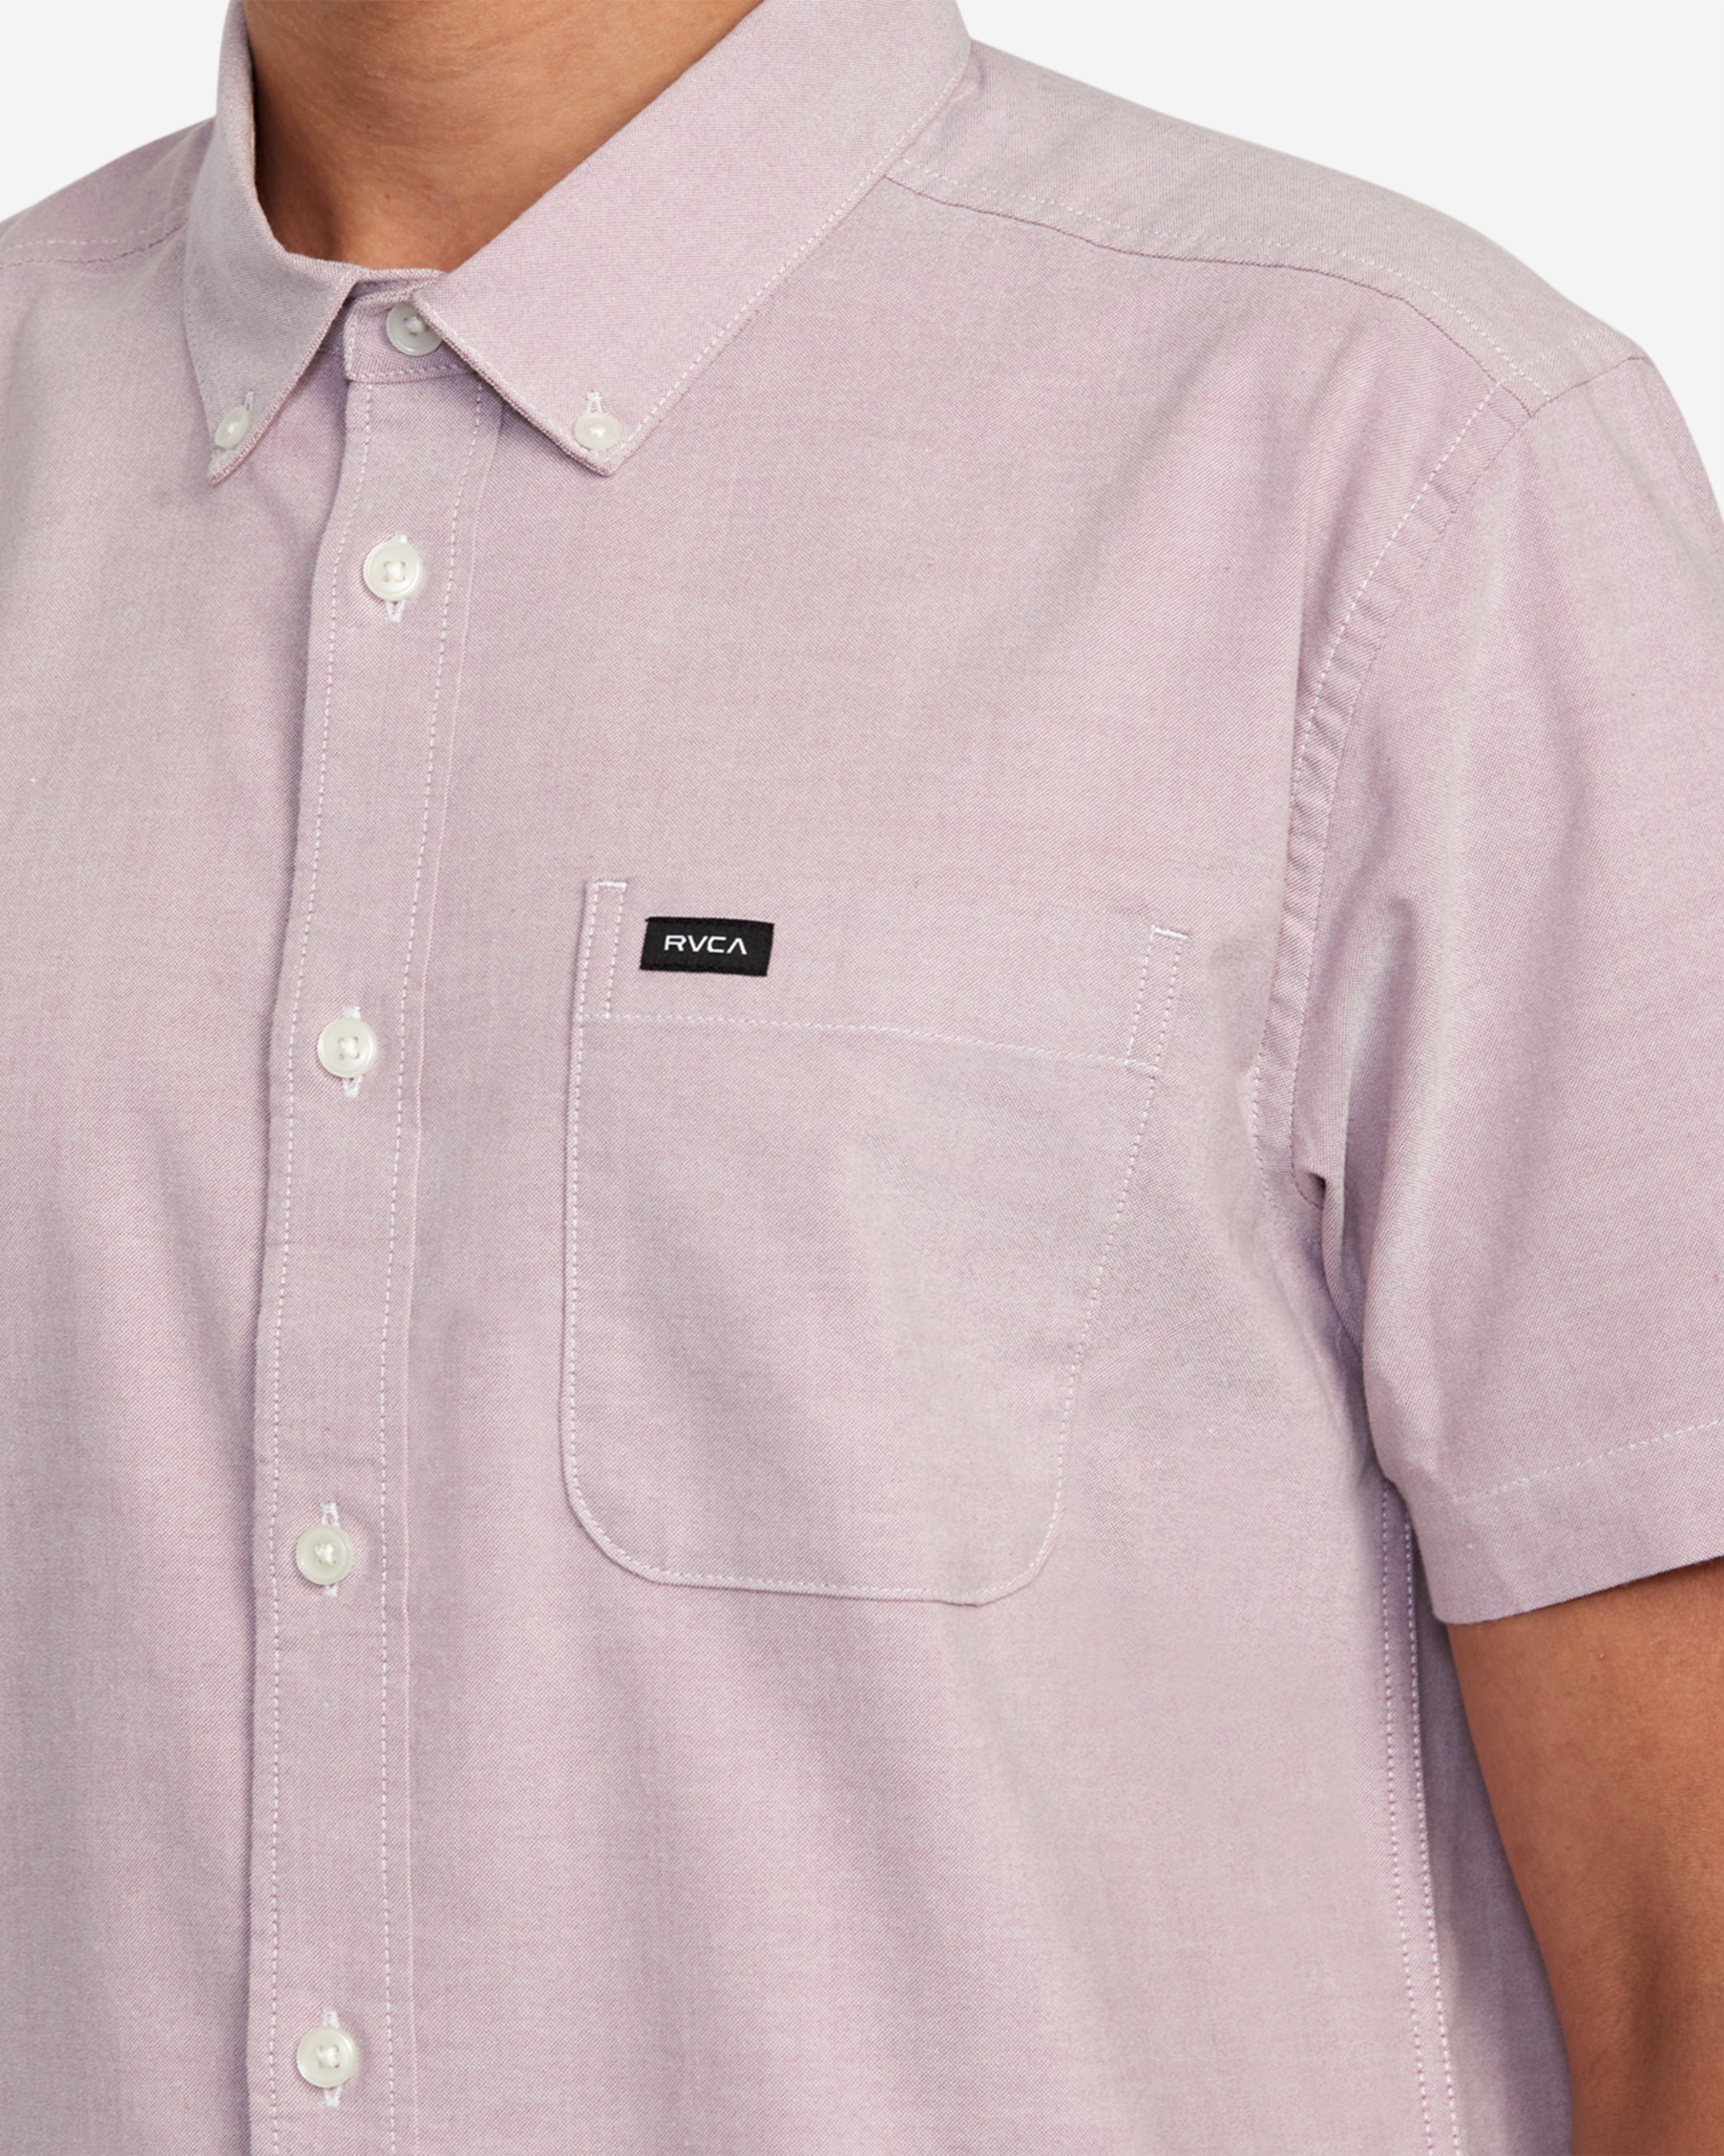 The RVCA That'll Do Stretch Short Sleeve Shirt combines heritage style and modern comfort in one. Made from soft stretch oxford, this button-down shirt features a traditional collar, short sleeves, scalloped hem, chest pocket and woven logo branding.